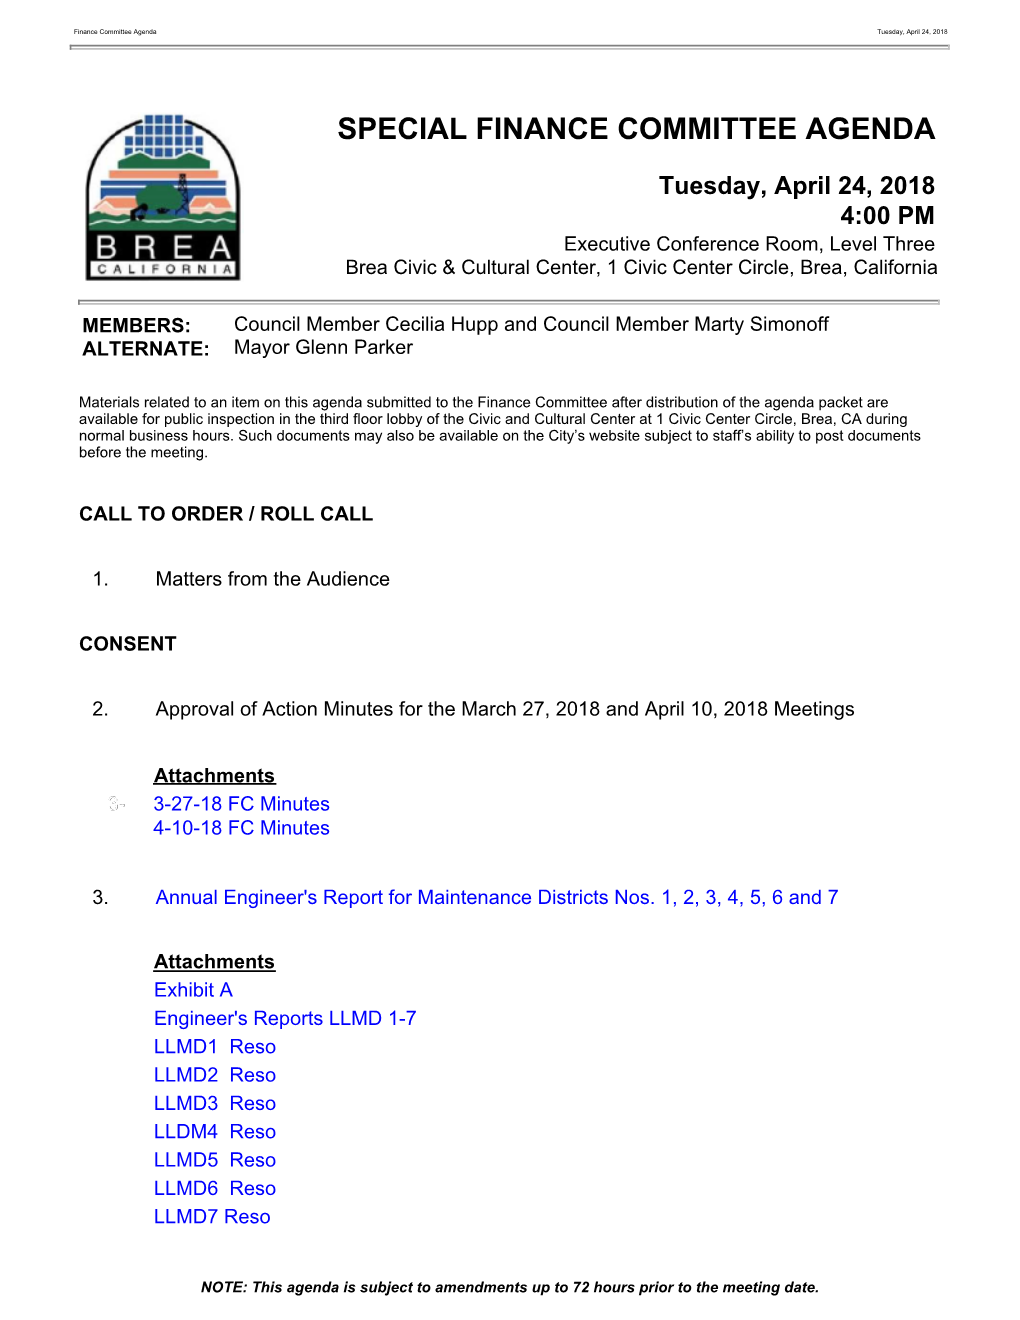 Special Finance Committee Agenda